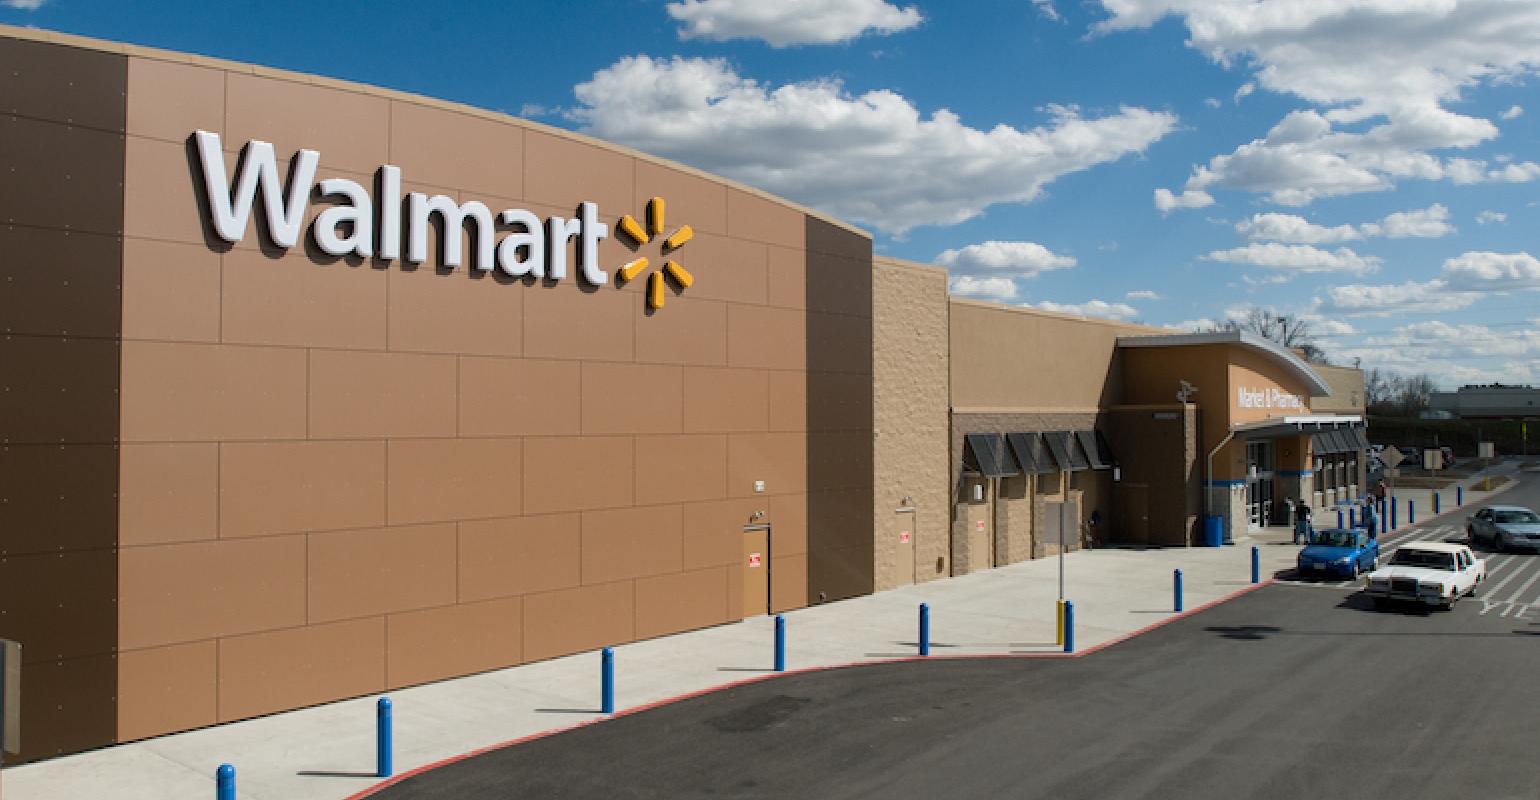 Walmart Team Lead Position (Duties, Pay, Is It A Hard Job + More)